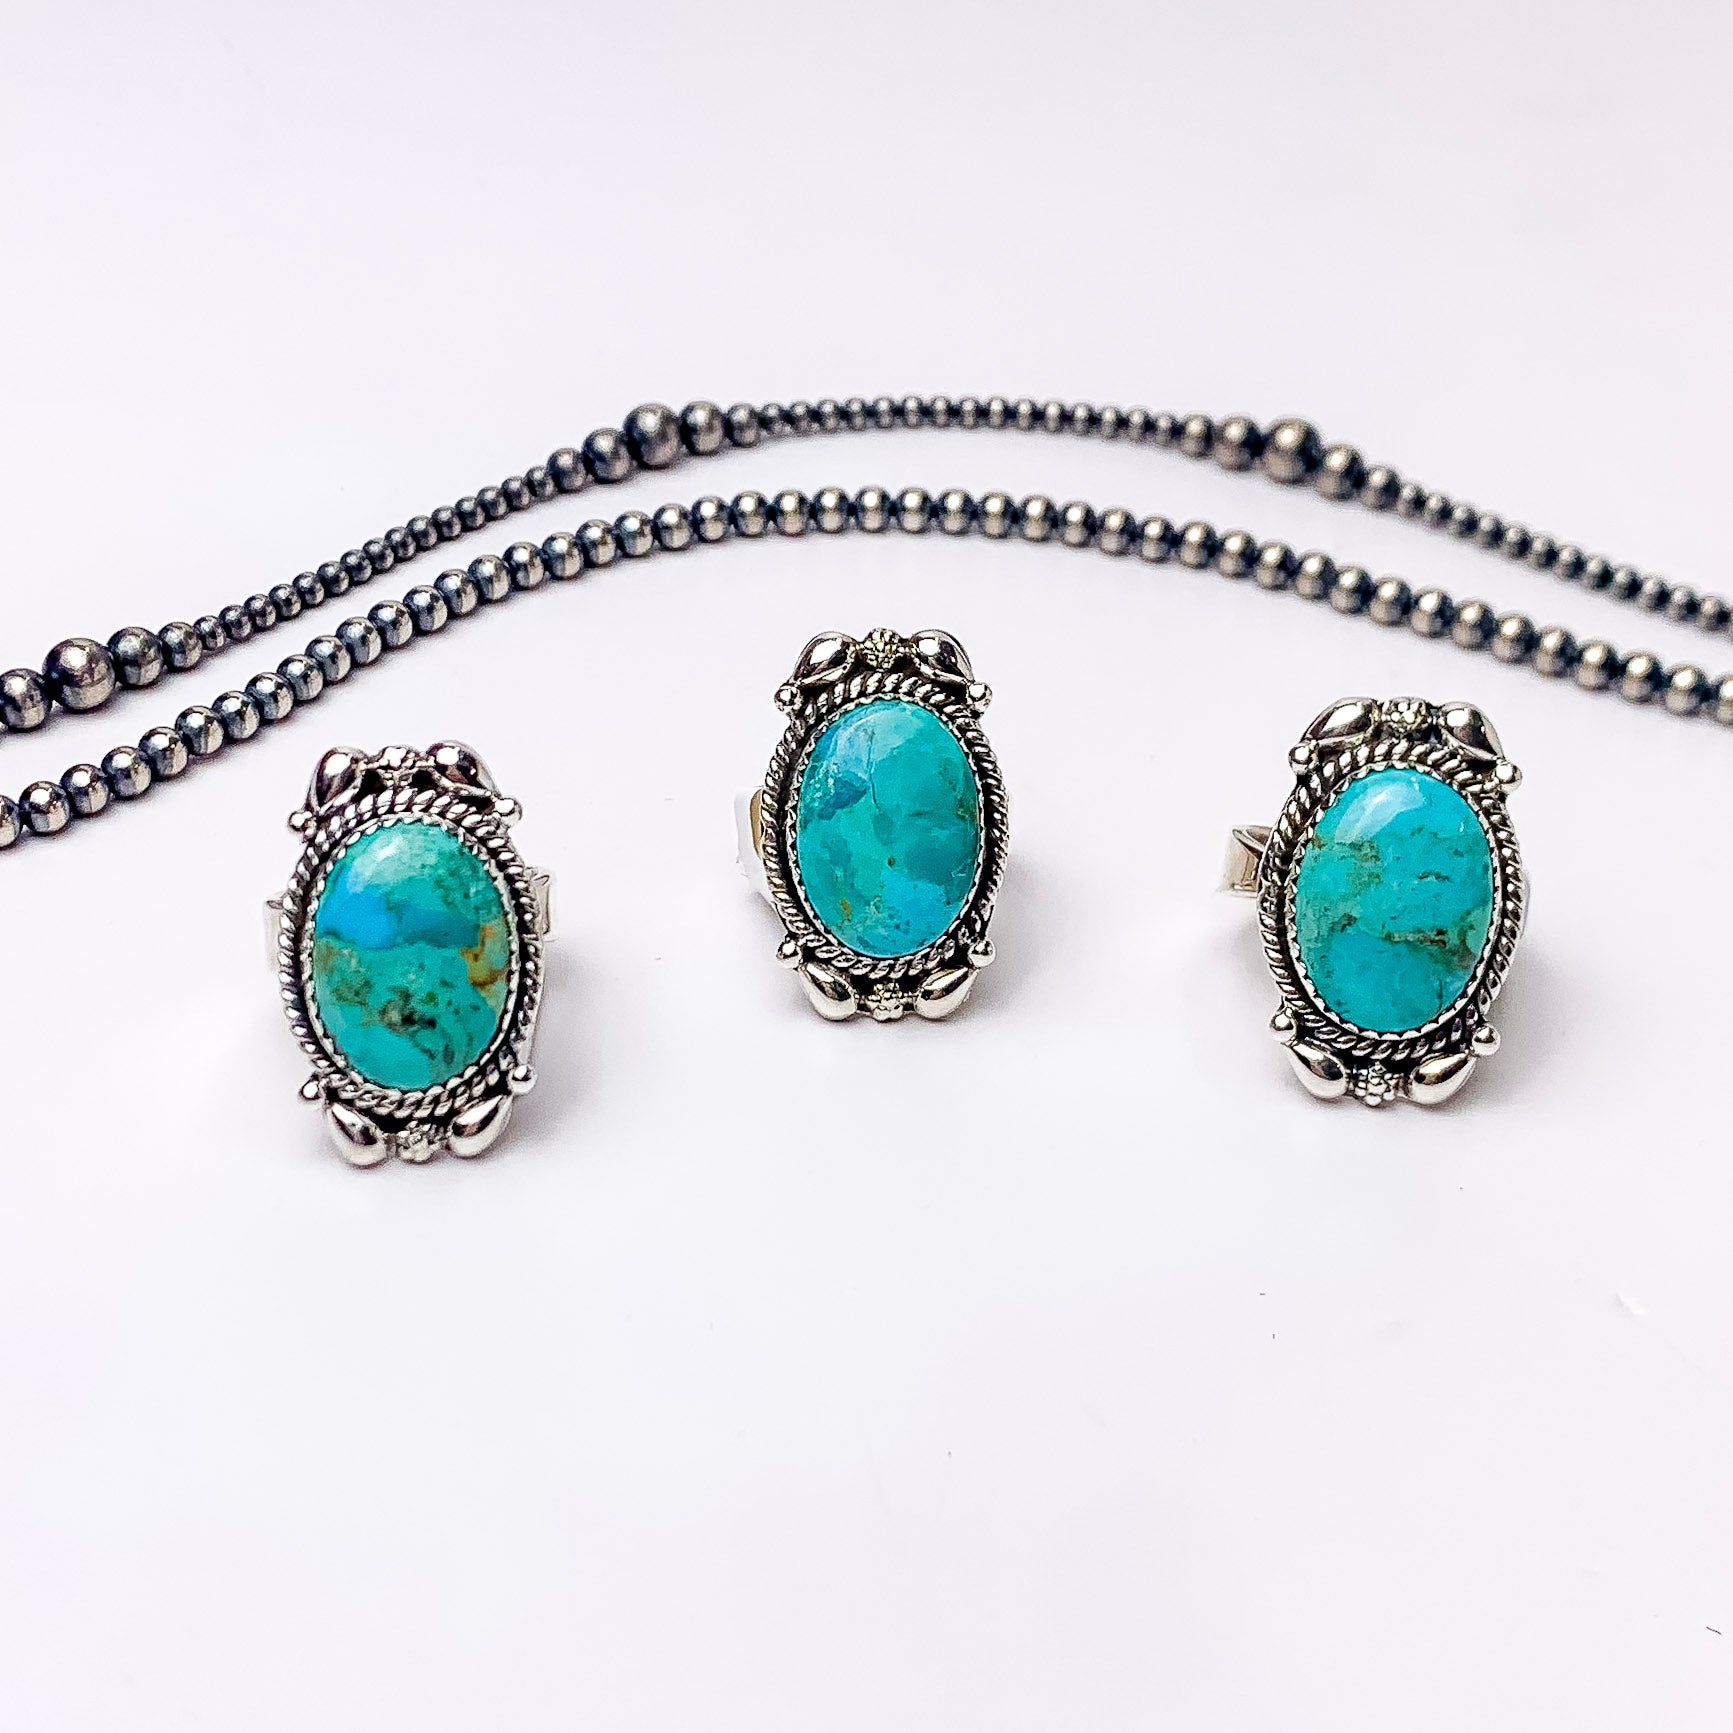 In the picture are three oval shaped partial desgin rings in the color kingman turquoise with a white background 